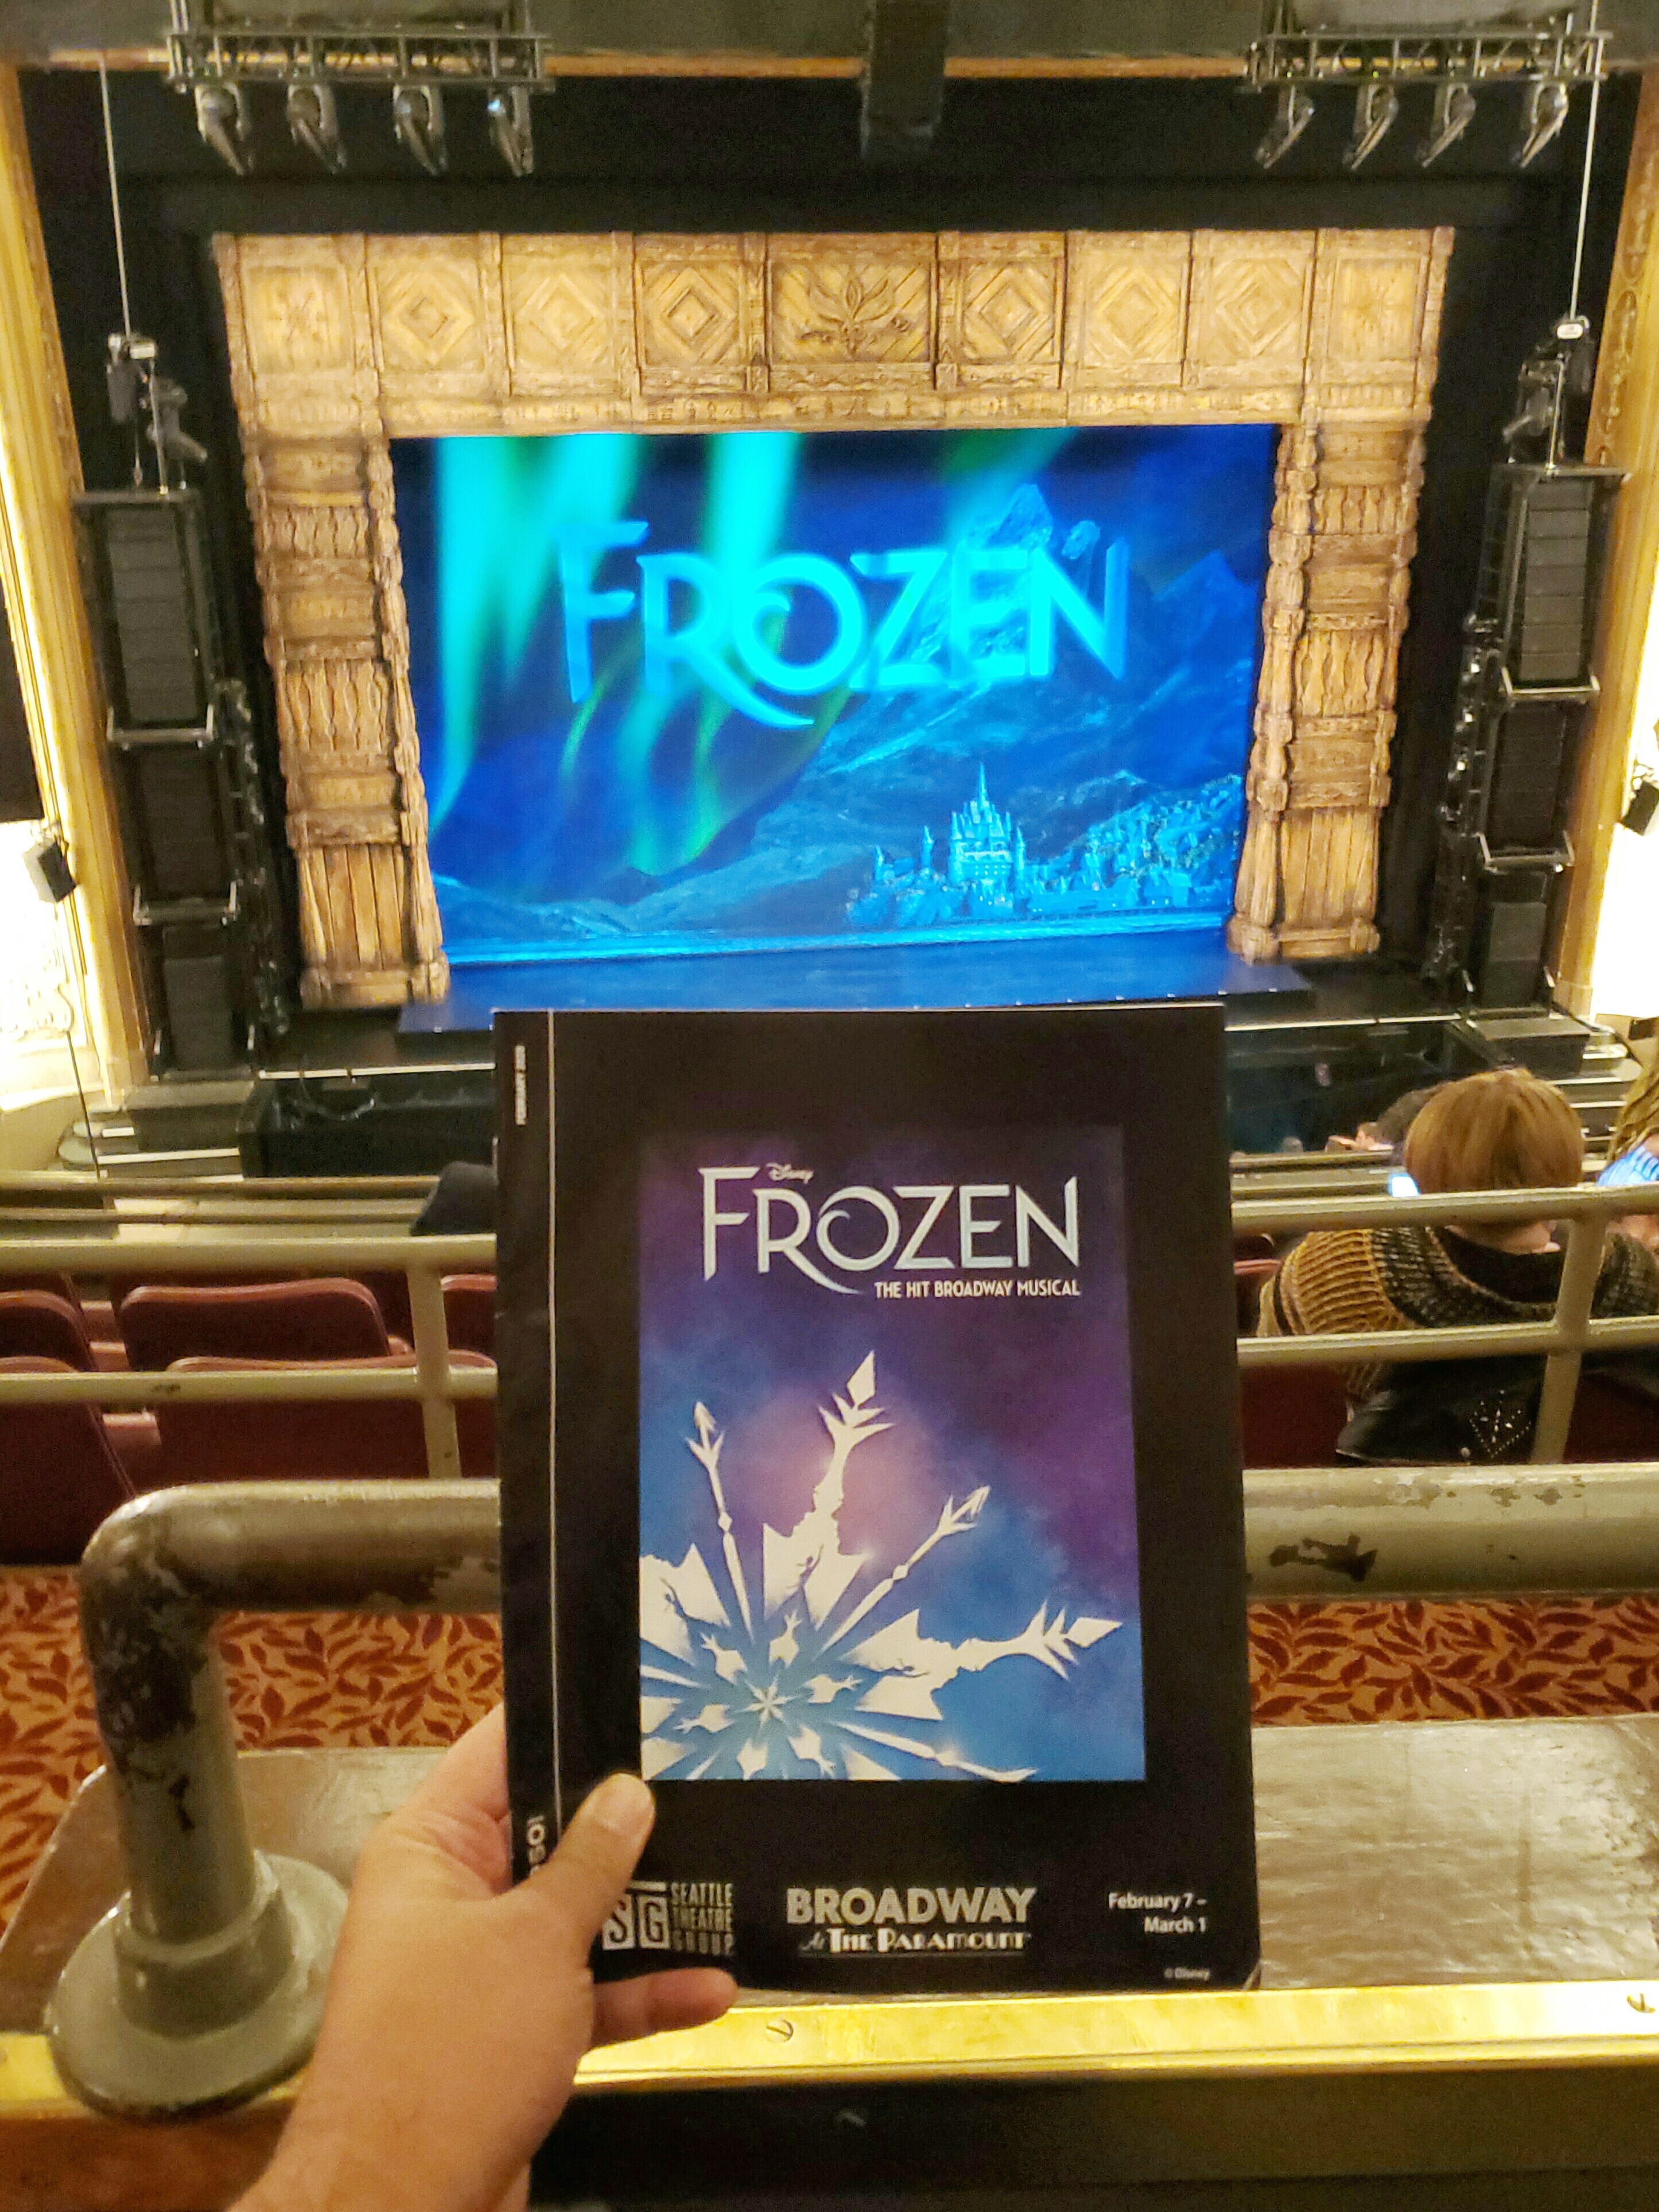 Disney's Frozen - The Musical at Paramount Theatre w/ Seattle Theatre Group. High-quality special effects & clever puppetry. #letItGo #frozen #musical